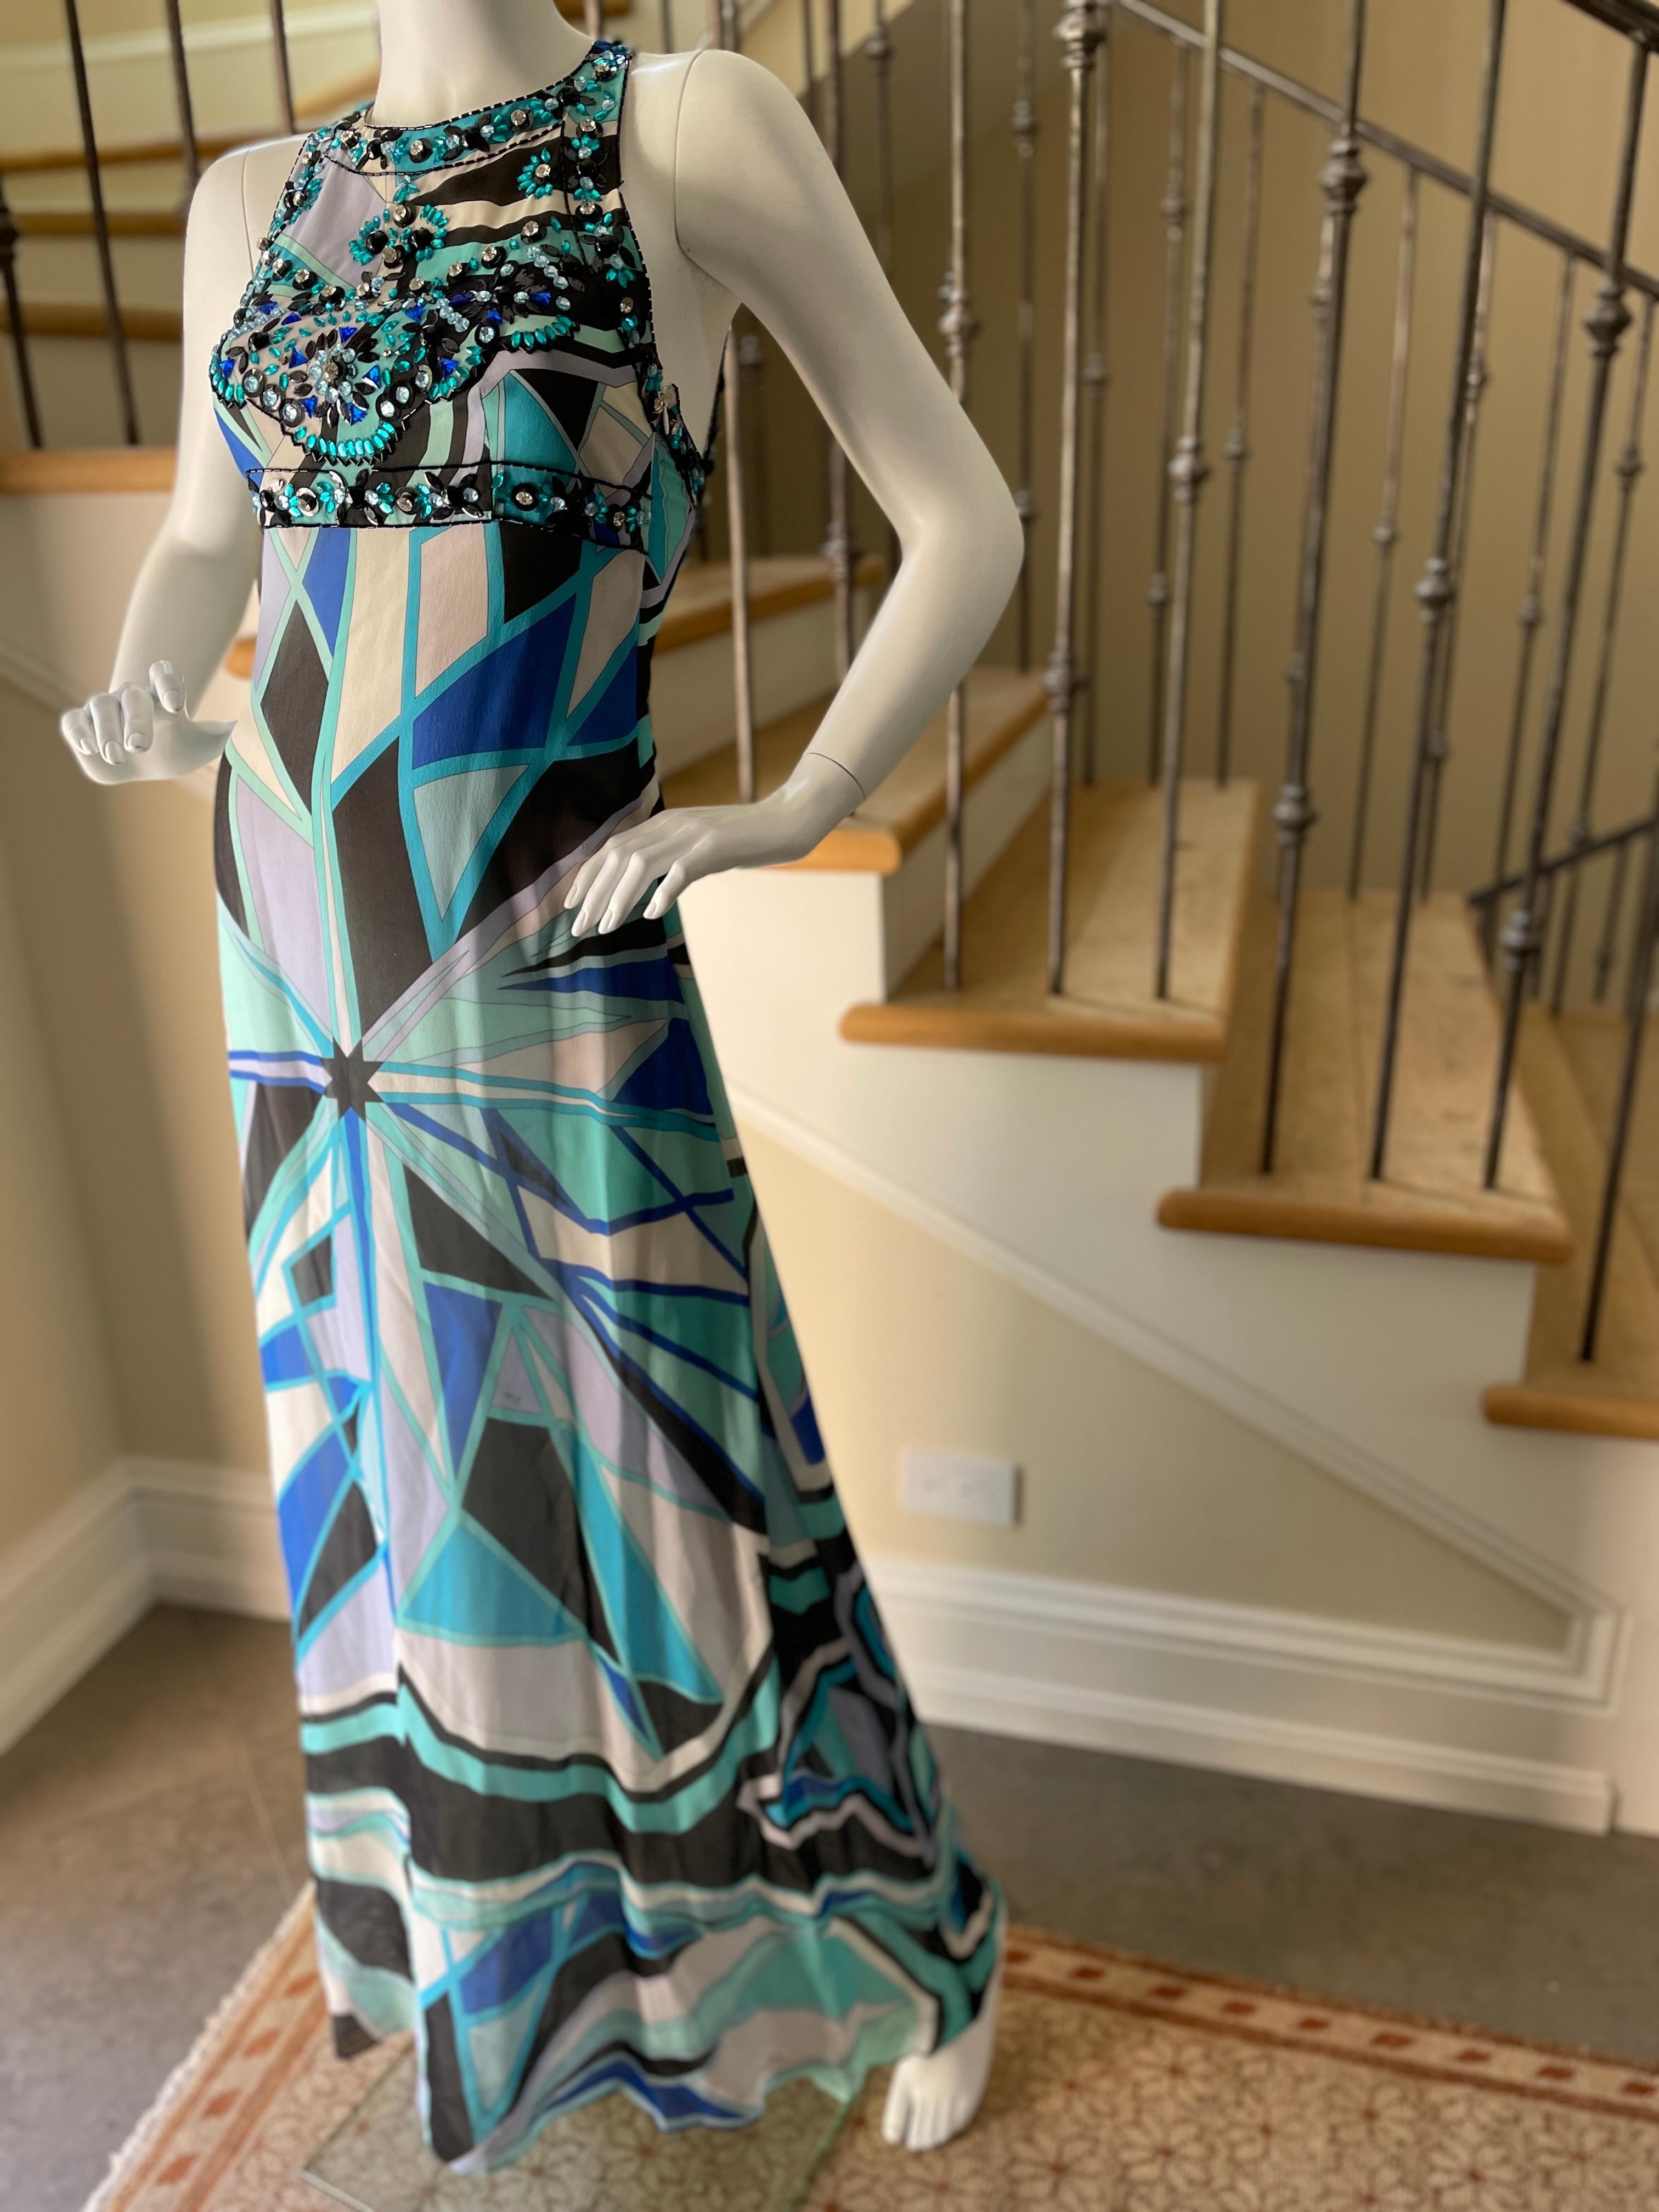 Emilio Pucci Vintage Silk Maxi Dress with Crystal Embellishments
So pretty , please use the zoom feature to see details
There is no size label, it is appx Size S US
 Bust 34